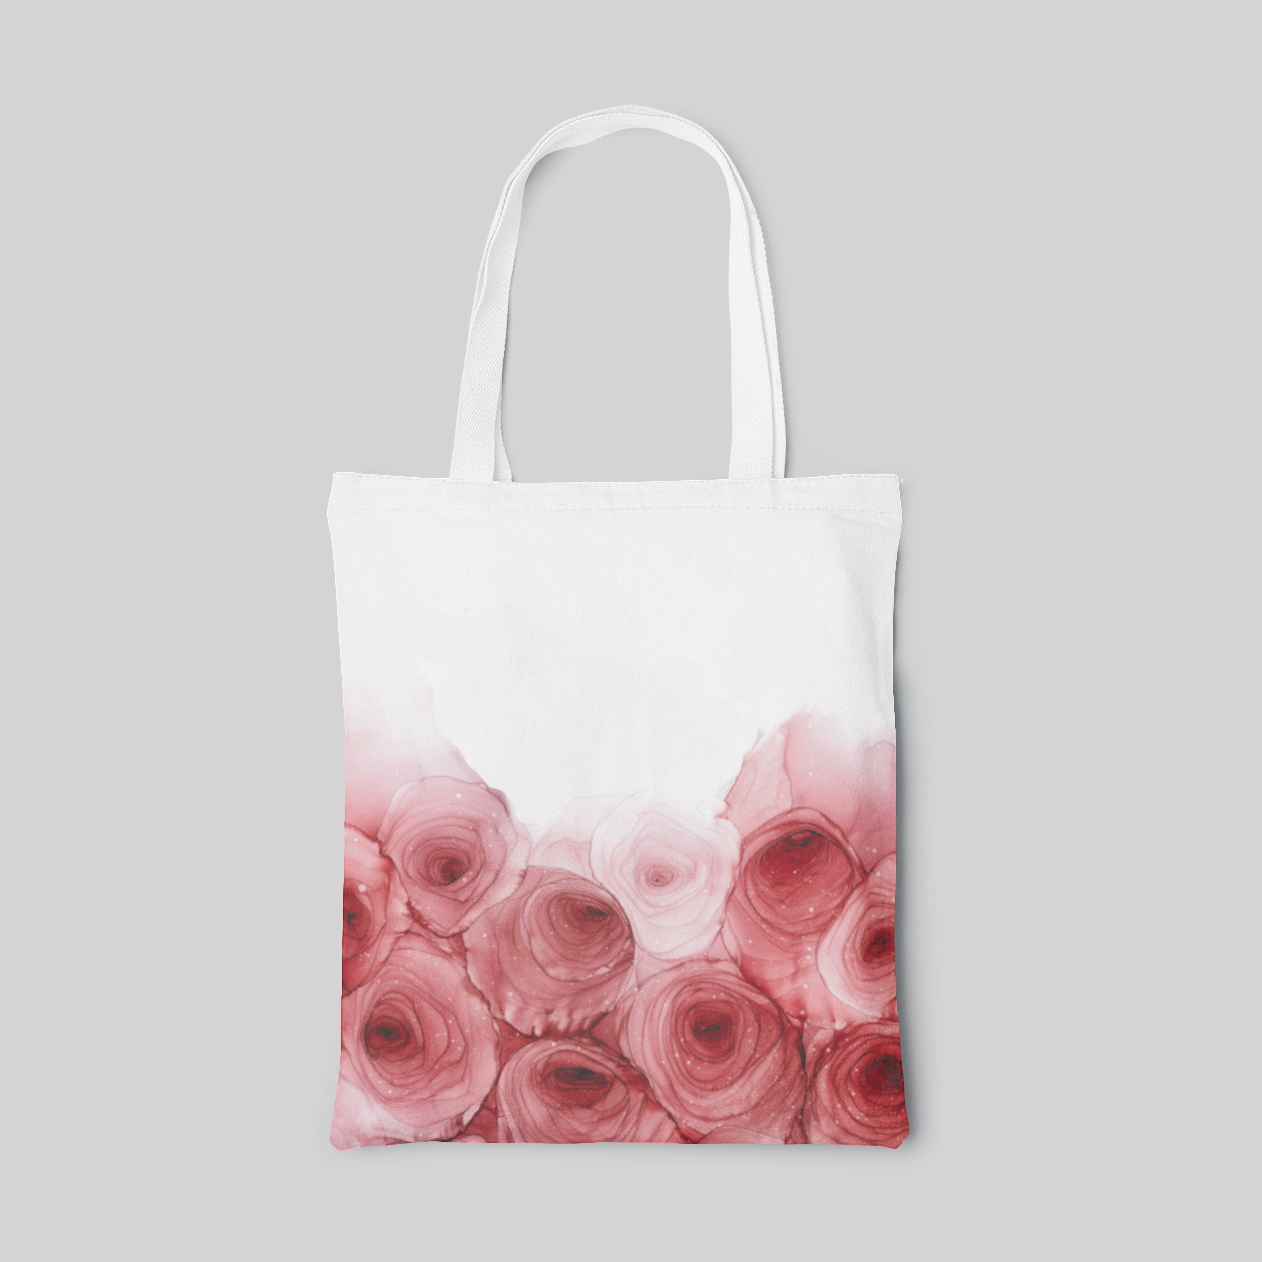 White minimalist designed tote bag with roses, front side